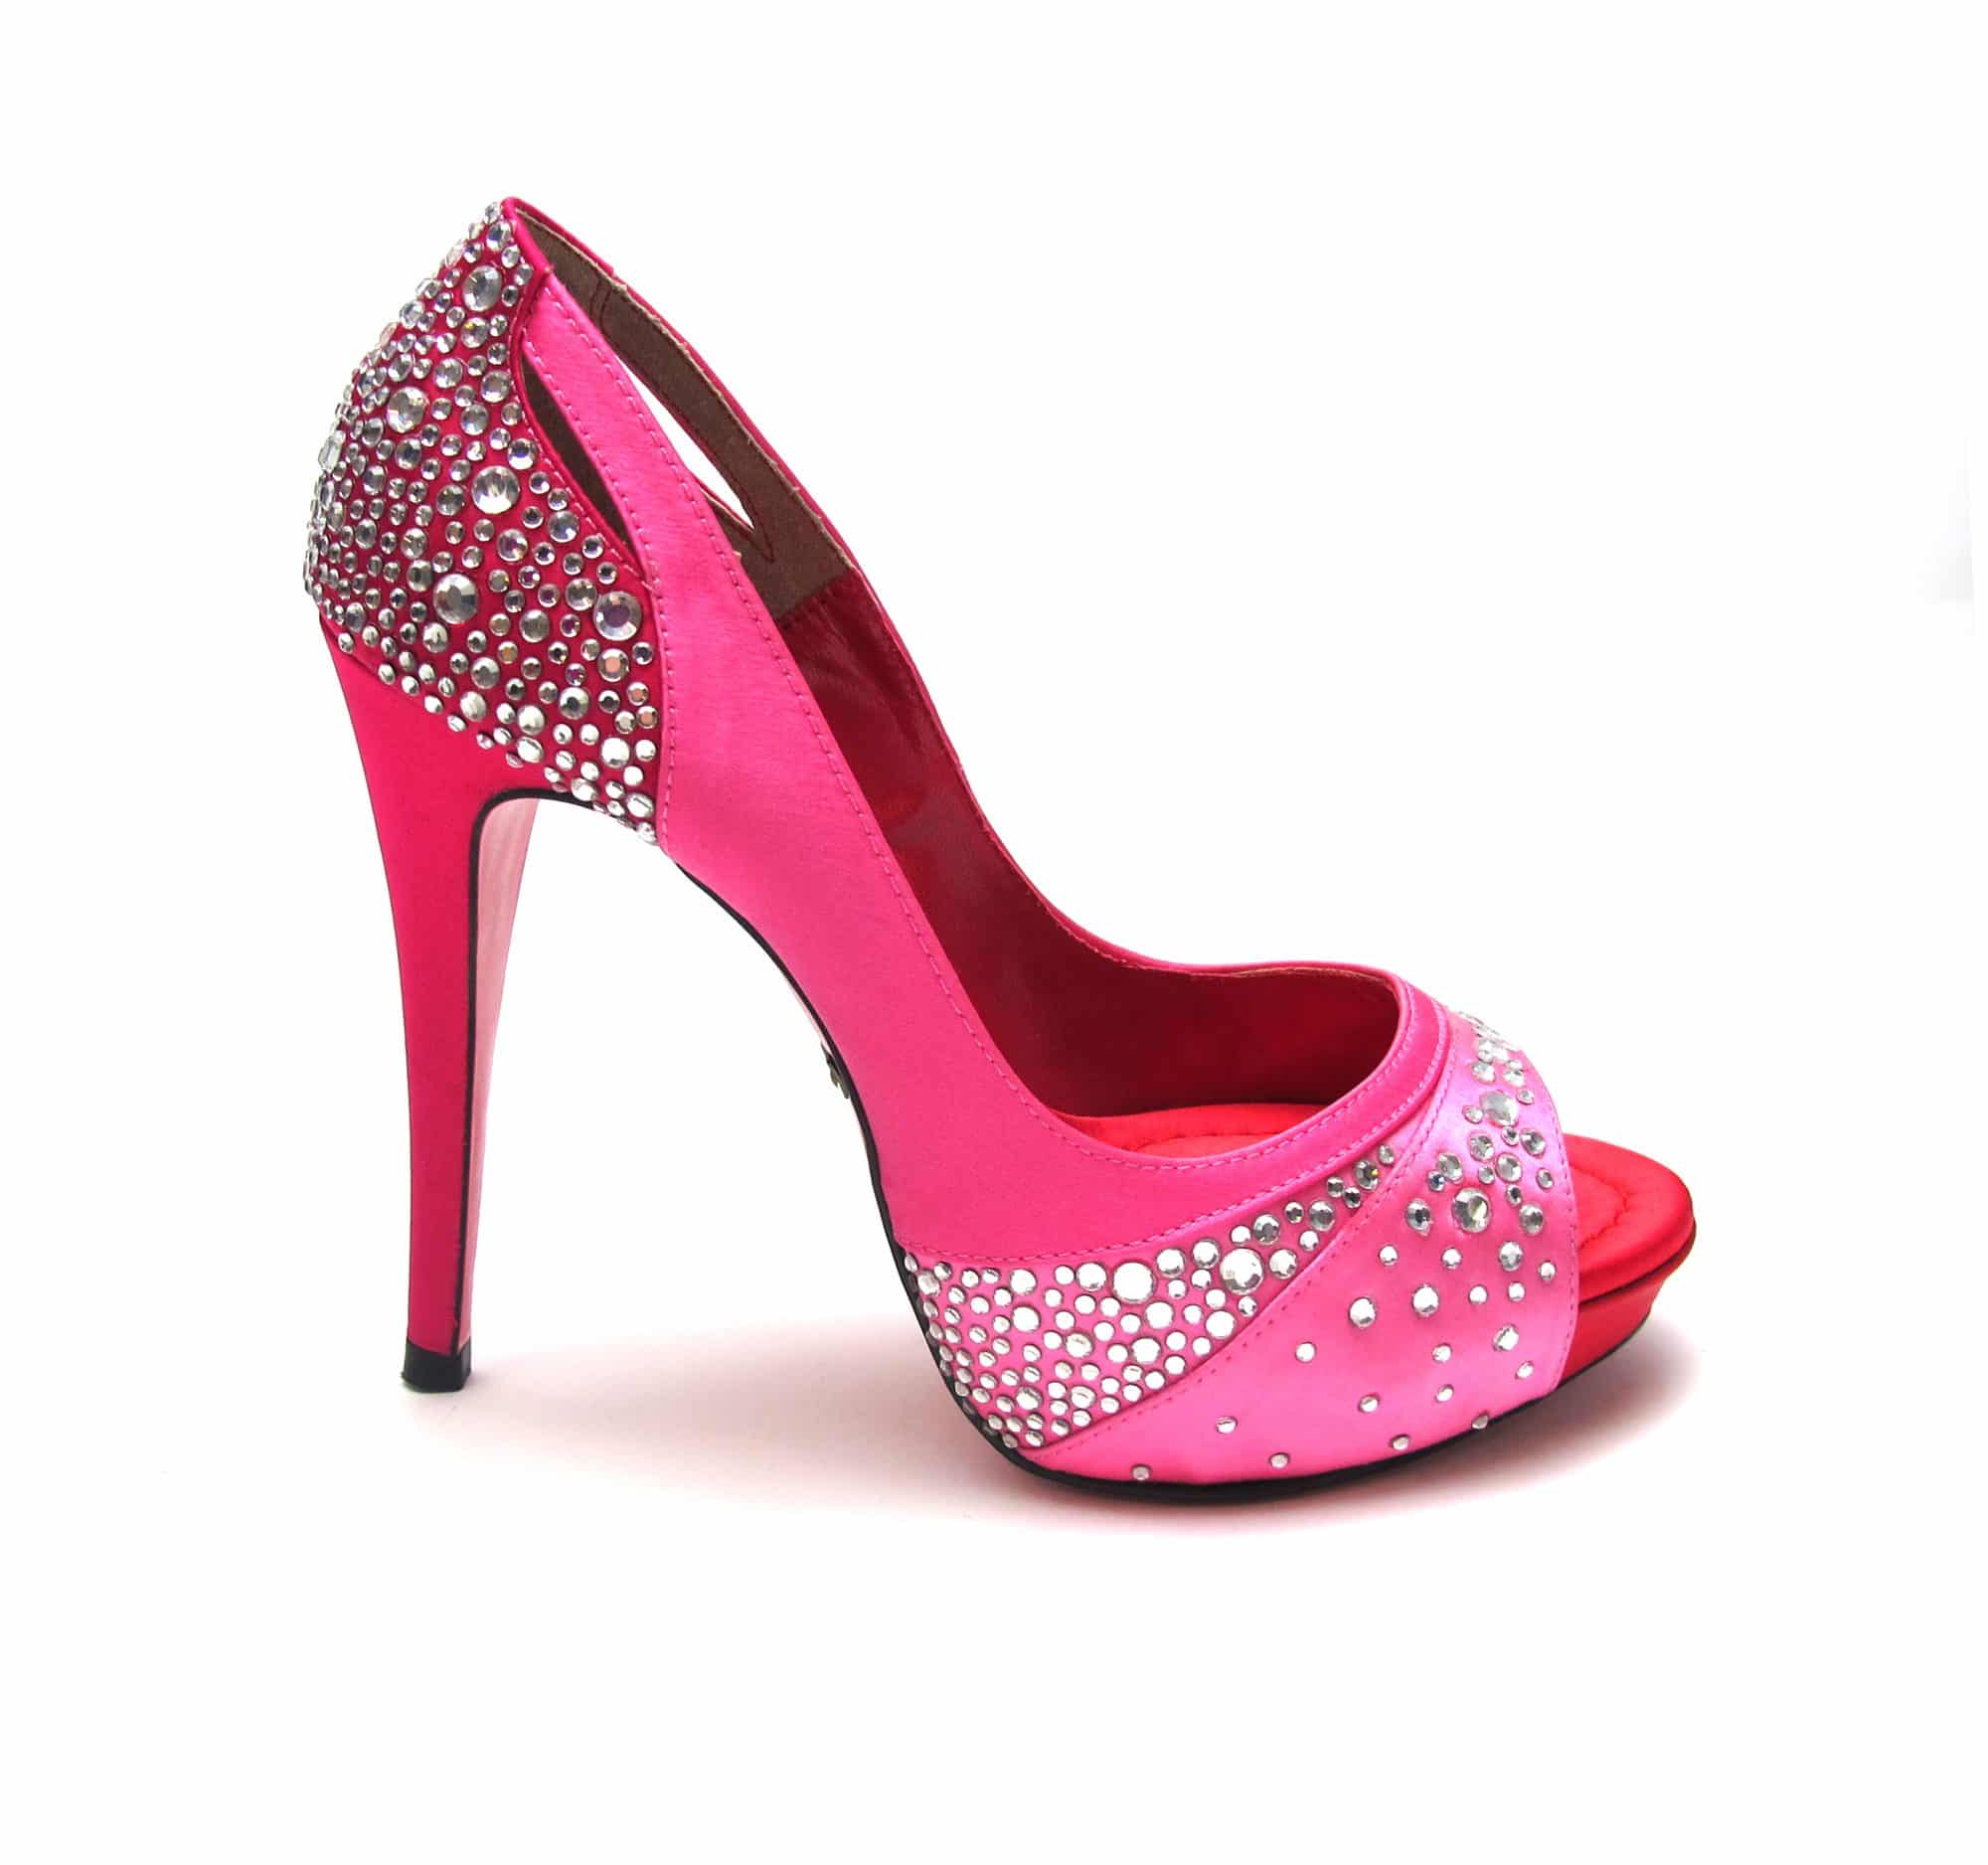 Suecomma Bonnie Couture Pink & Red Open Toe Heels - Alila